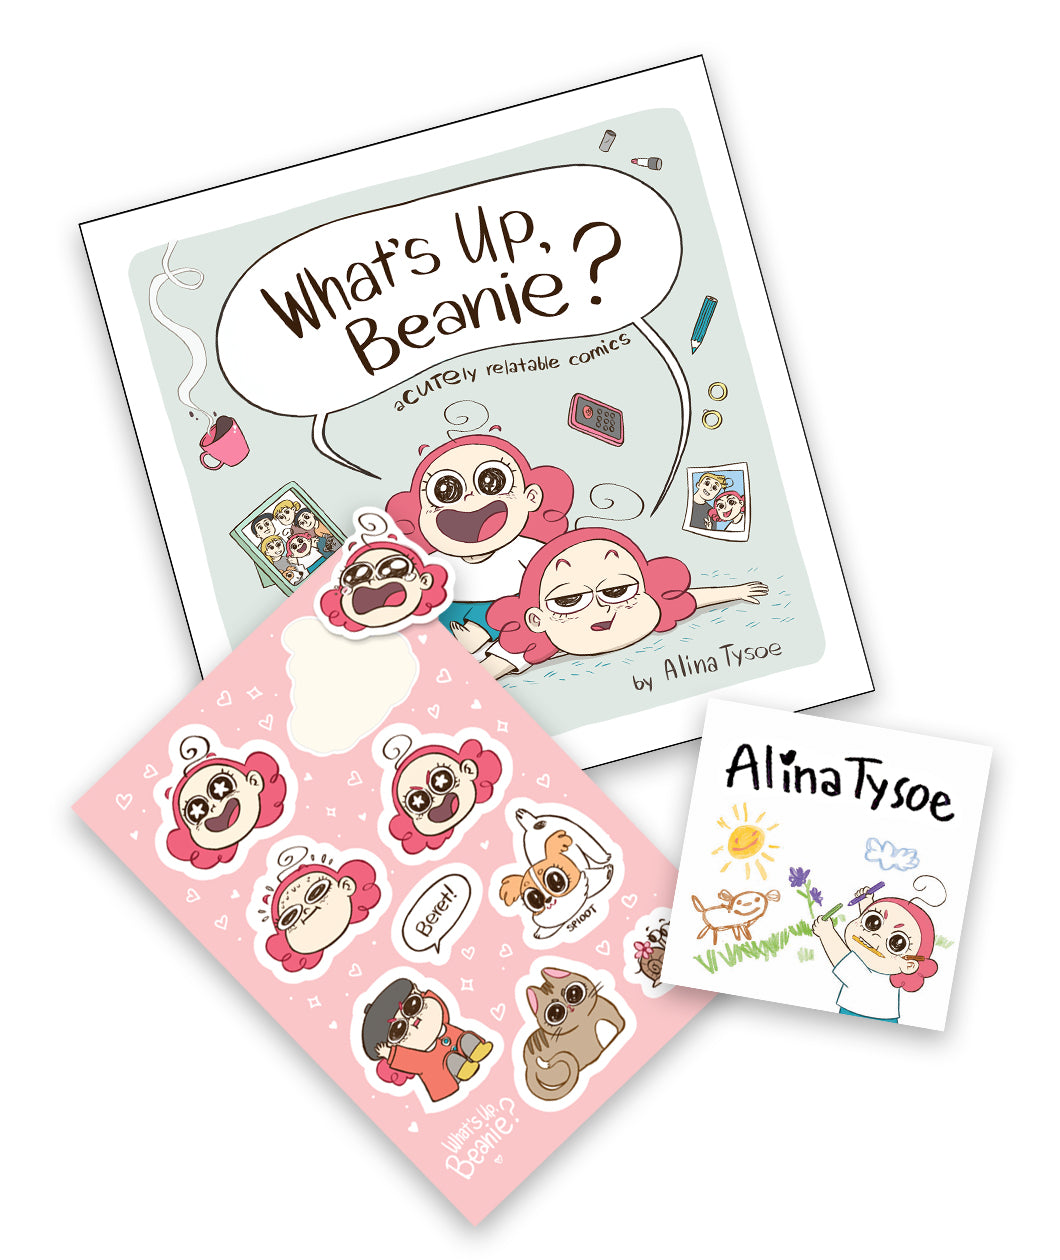 Three items in a pile: A rectangular pink sticker sheet that contains 9 stickers of cartoon drawings of beanie and pets. A signed square bookplate that has a drawing of Beanie sketching a scene and the signature "Alina Tysoe." A square book whose cover says "What's Up, Beanie?" in a large word balloon, spoken by two cartoon girls with red hair.